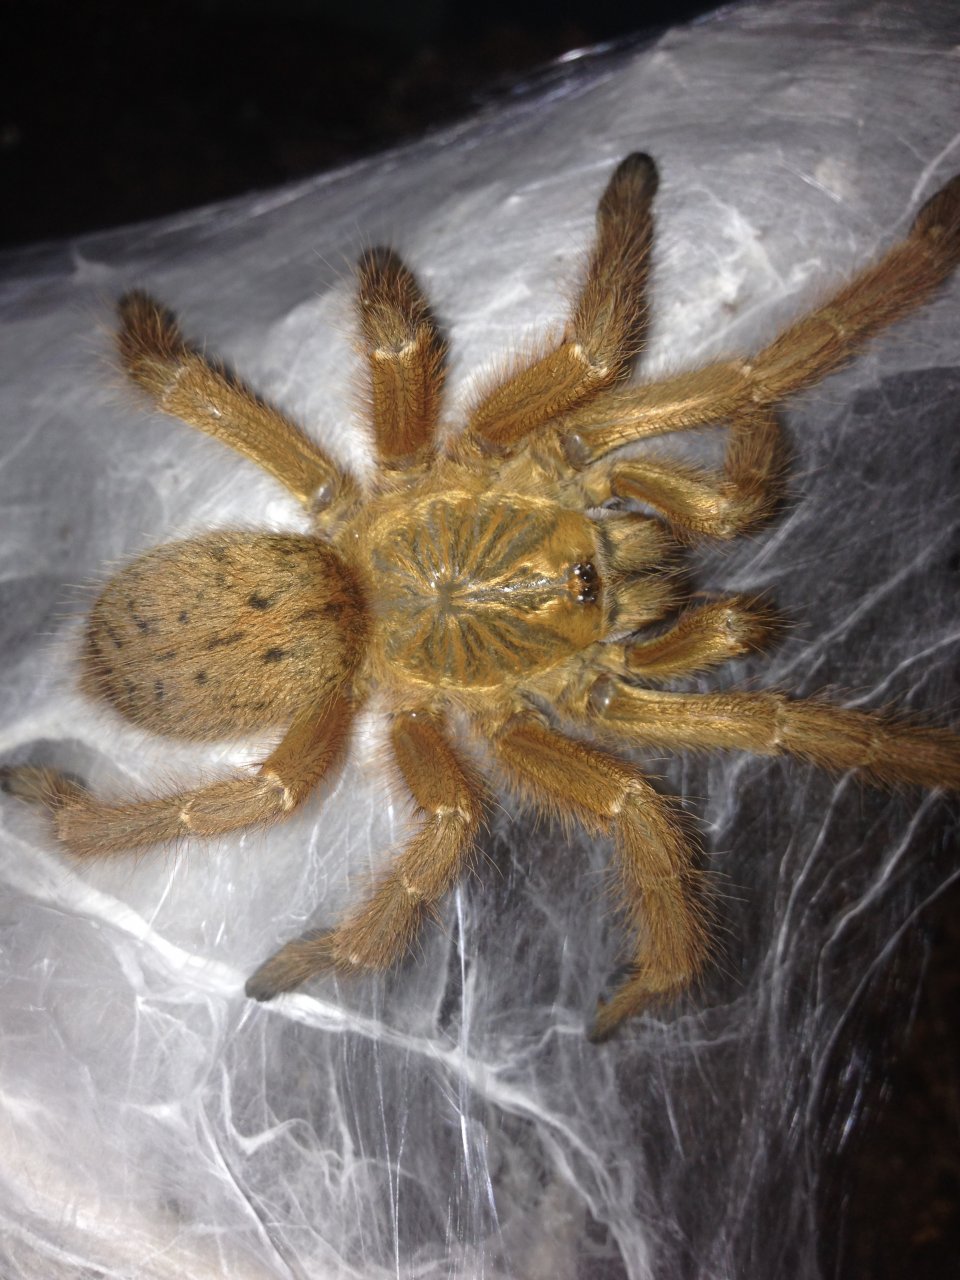 0.1 P. murinus Freshly Molted